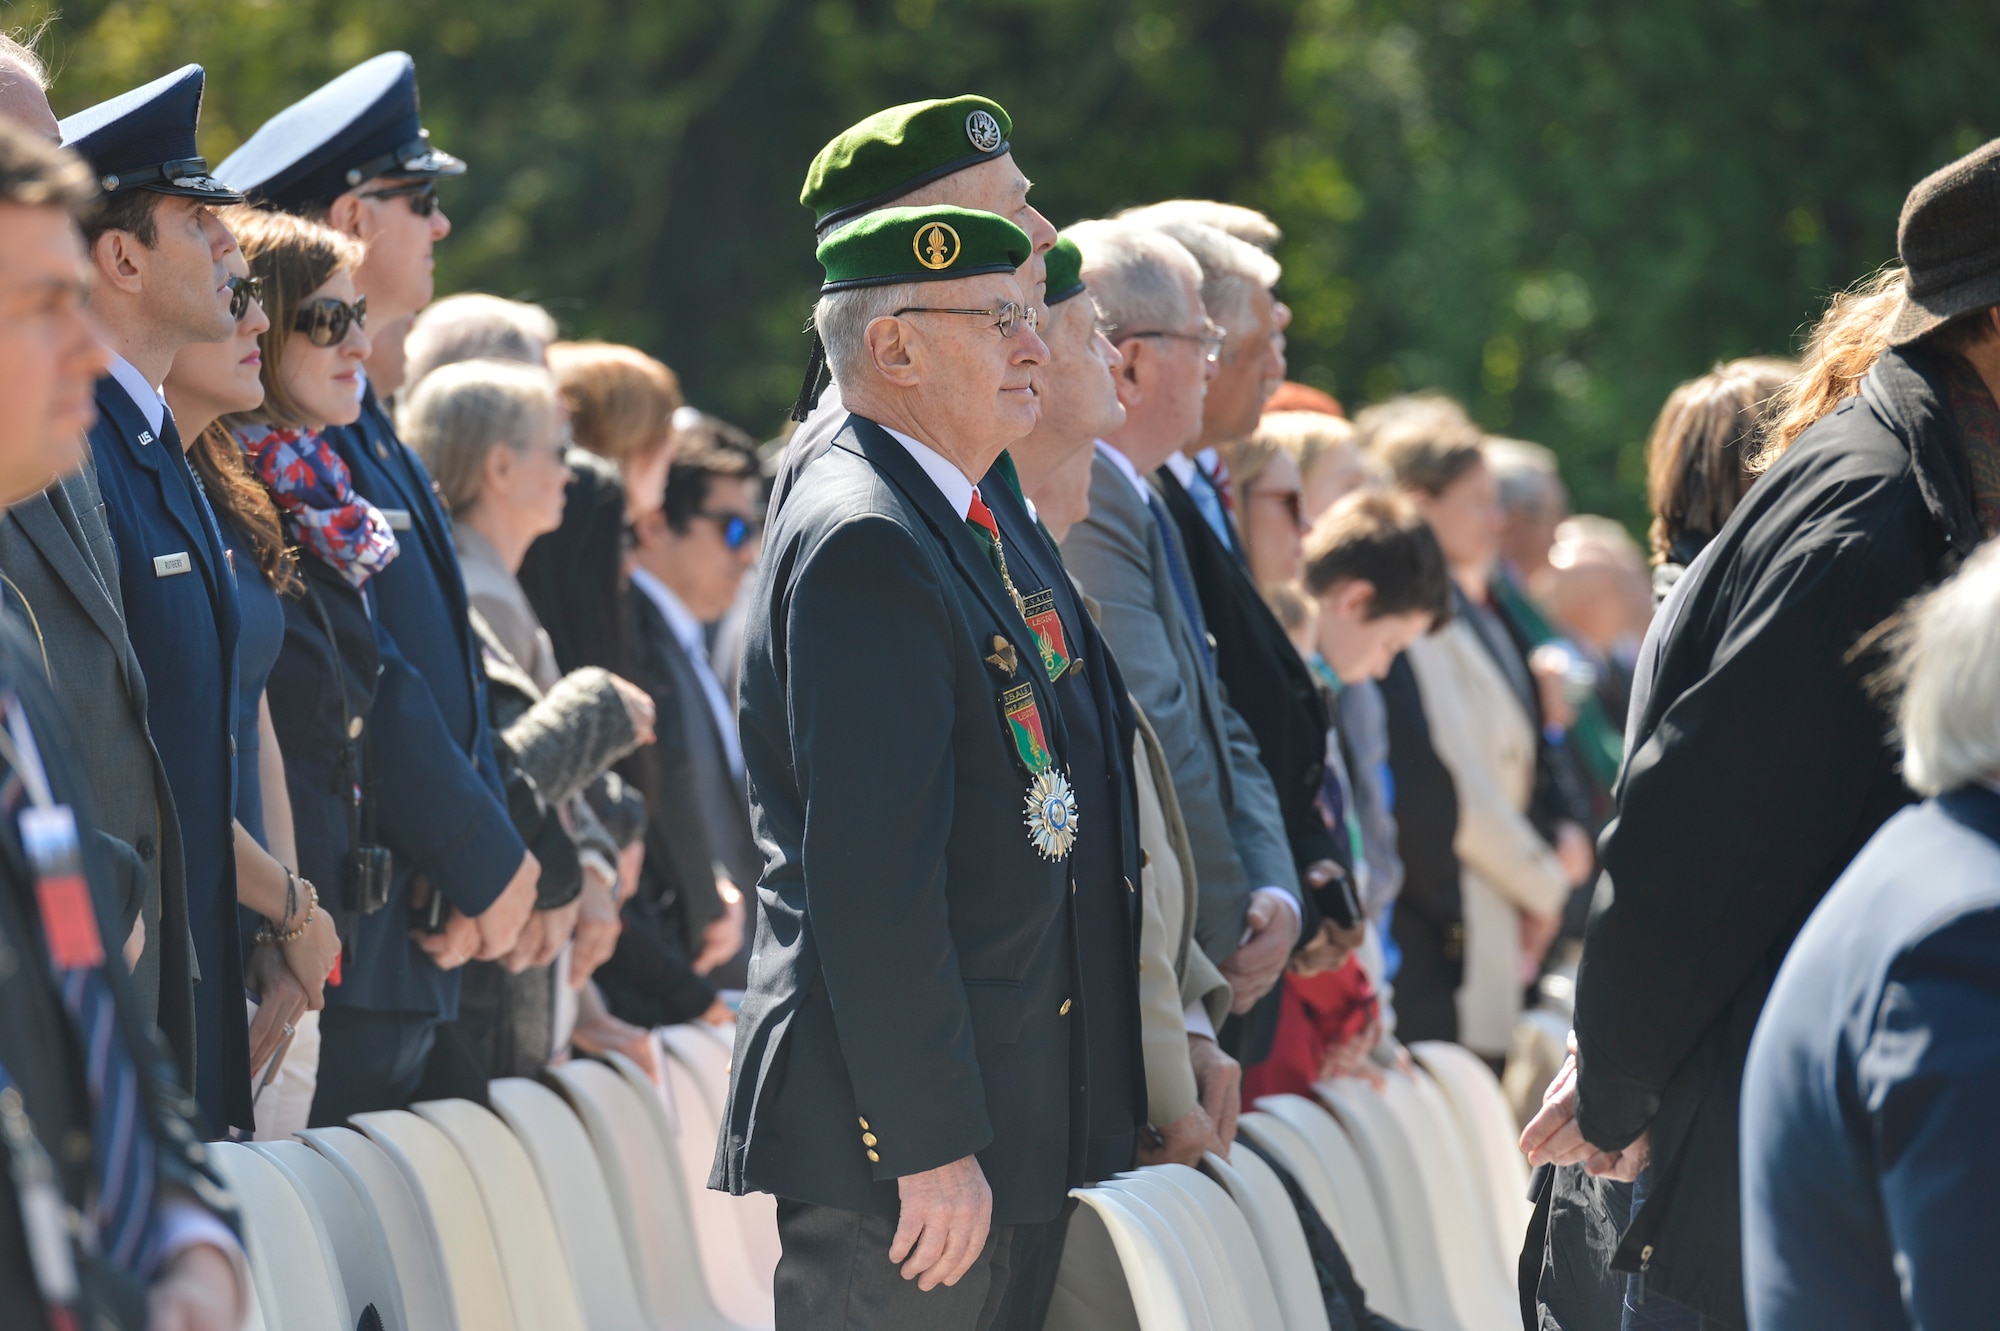 PARIS – French and American military and civilian representatives attend the Lafayette Escadrille Memorial 100th anniversary ceremony in Marnes-la-Coquette, France, April 20, 2016, during a ceremony honoring the 268 Americans who joined the French Air Force before the U.S. officially engaged in World War I. Airmen from the U.S. Air Force and their French counterparts, along with civilians from both countries, paid tribute to the men who served and the sacrifices of the 68 American airmen who died fighting with the French in World War I. The memorial highlights the 238-year alliance between the U.S. and France with their long history of shared values and sacrifice. (U.S. Air Force Photo by Tech. Sgt. Joshua DeMotts/Released)